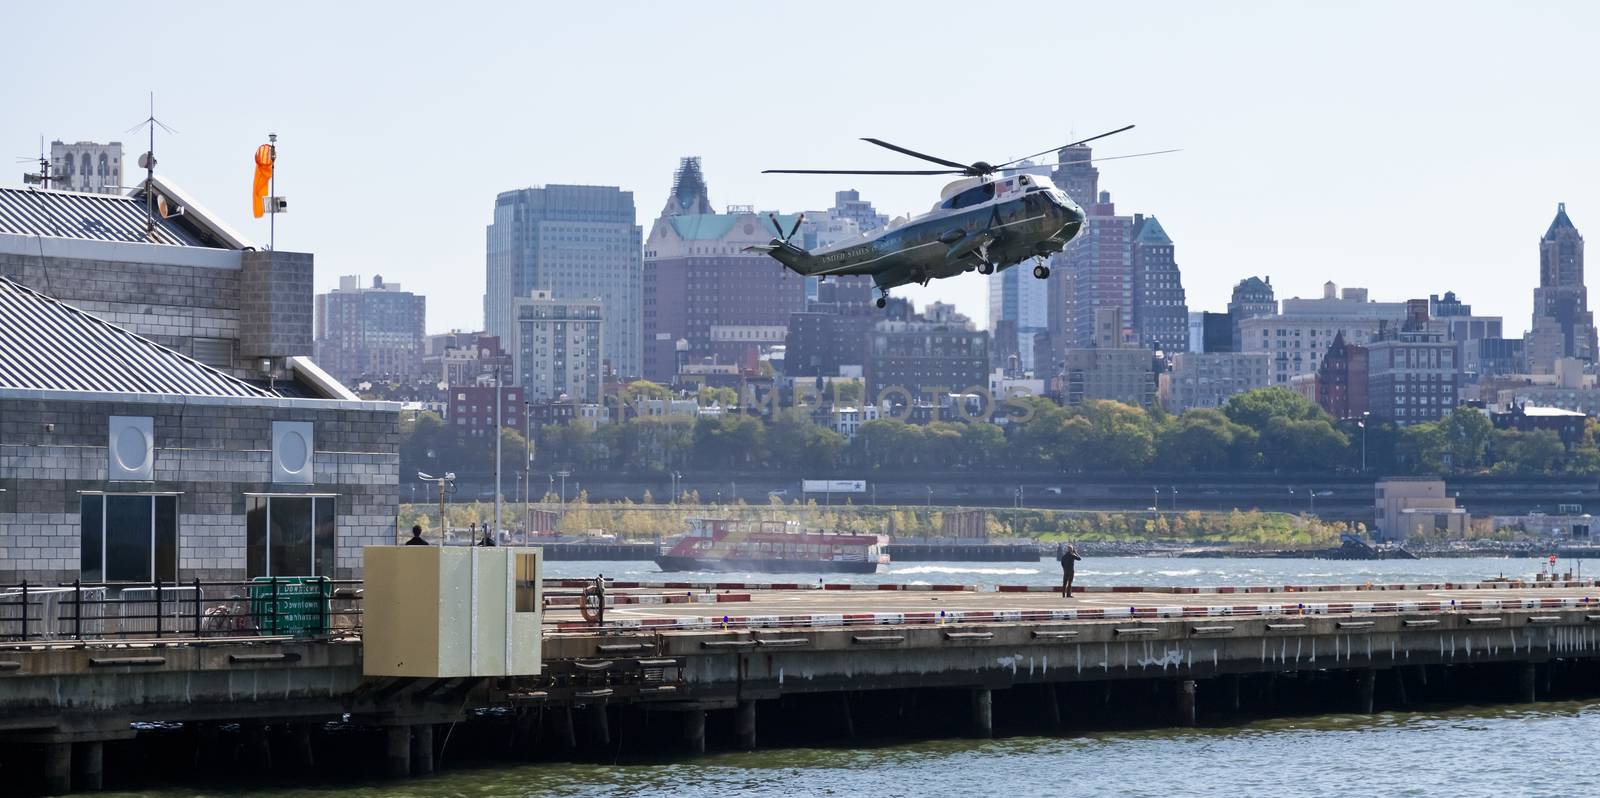 New York City, USA-October 5, 2014: Sikorsky VH-3D. Marine Helicopter Squadron One (HMX-1), is a squadron responsible for the transportation of the President of the United States, Vice President, Cabinet members and other VIPs. Taken in Manhattan Heliport